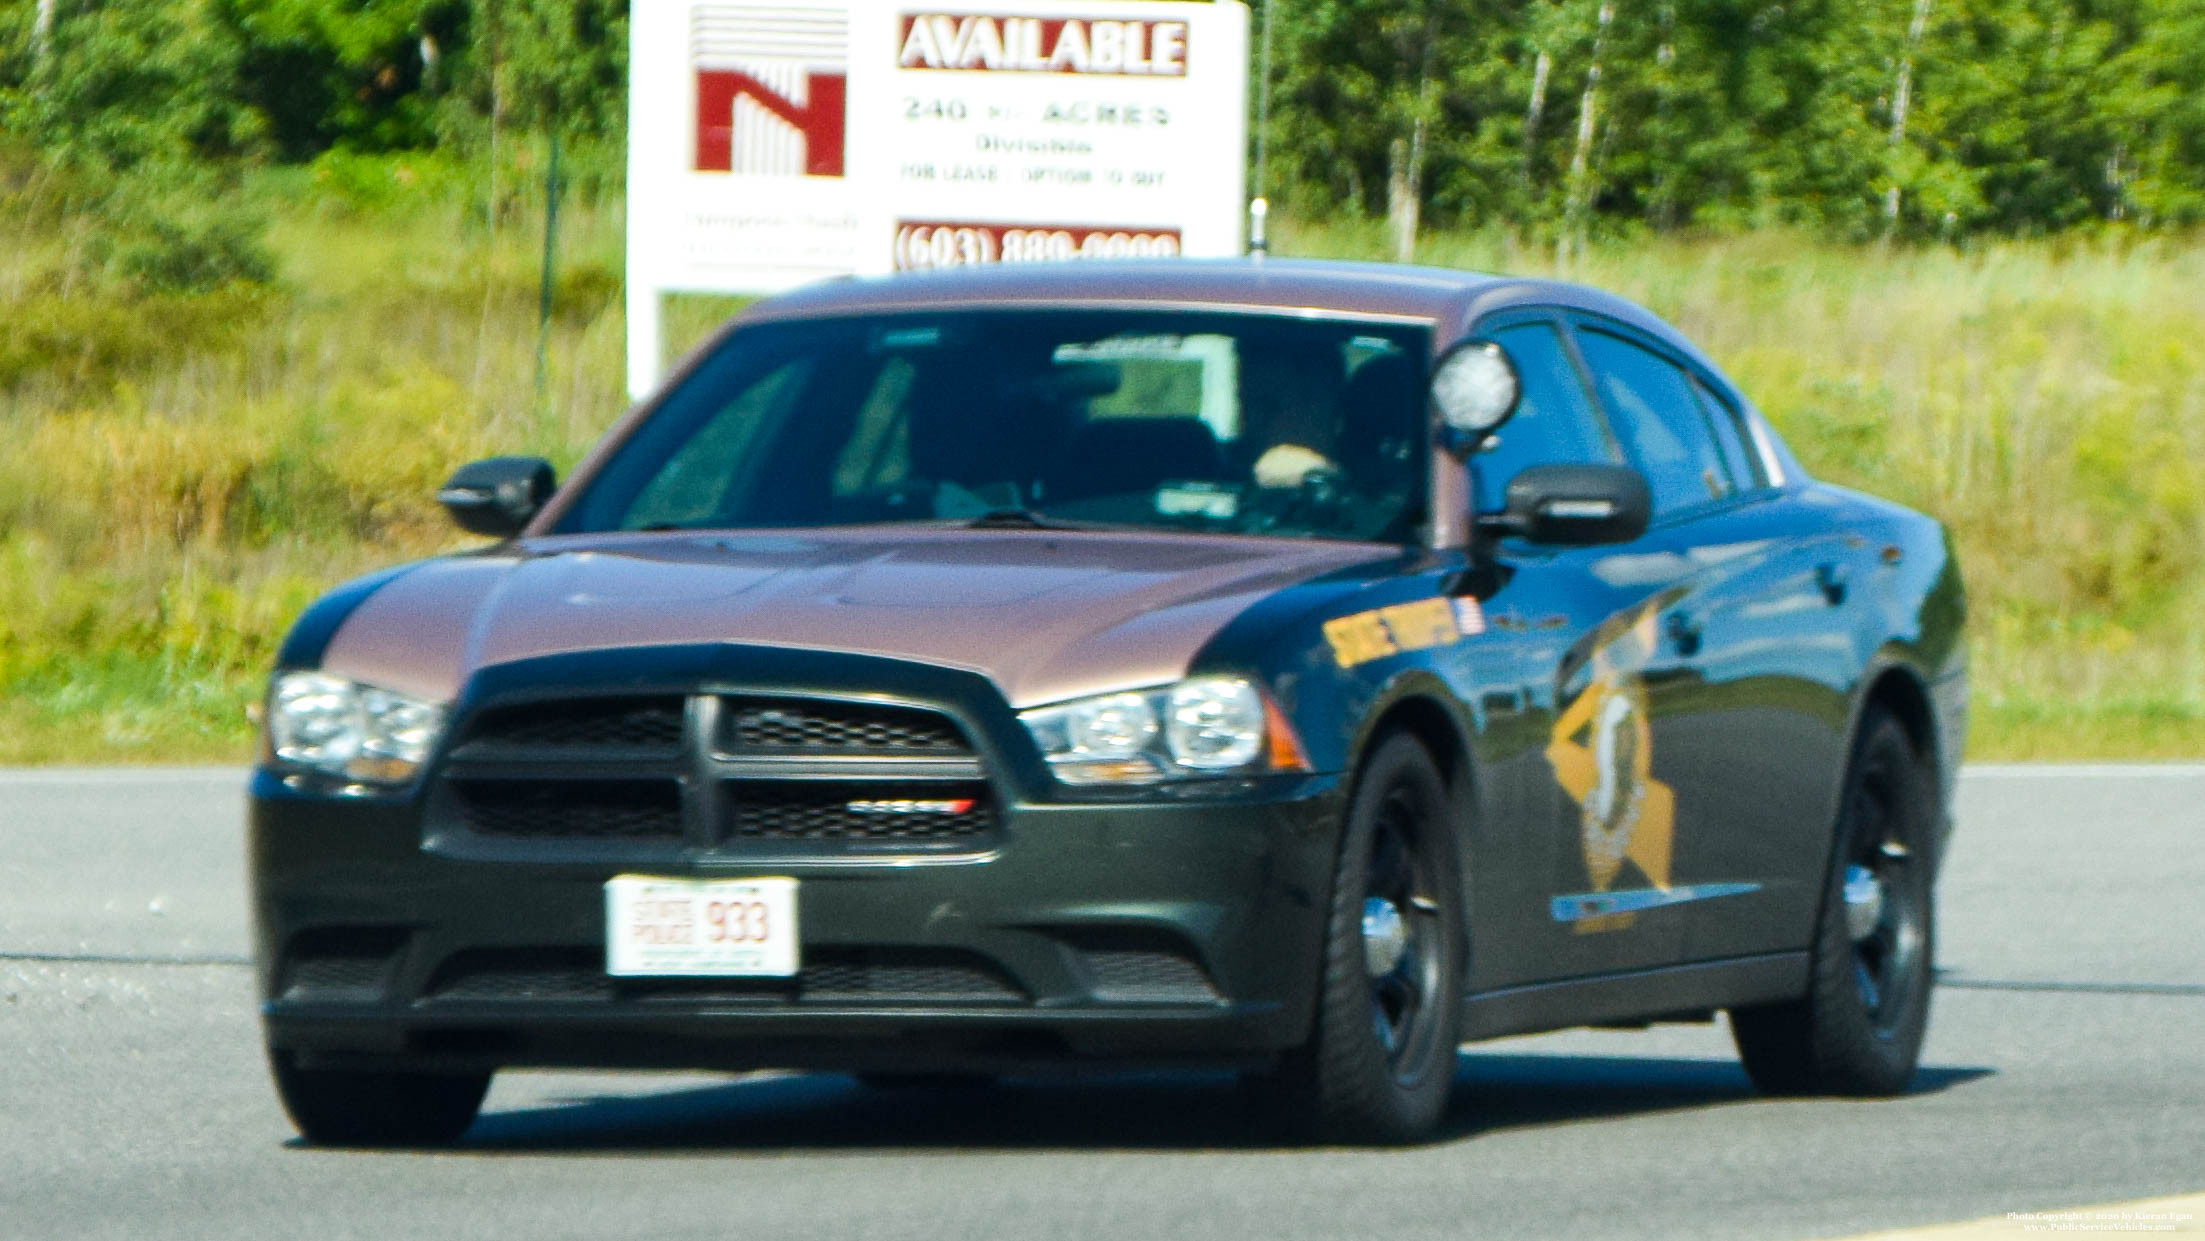 A photo  of New Hampshire State Police
            Cruiser 933, a 2011-2014 Dodge Charger             taken by Kieran Egan